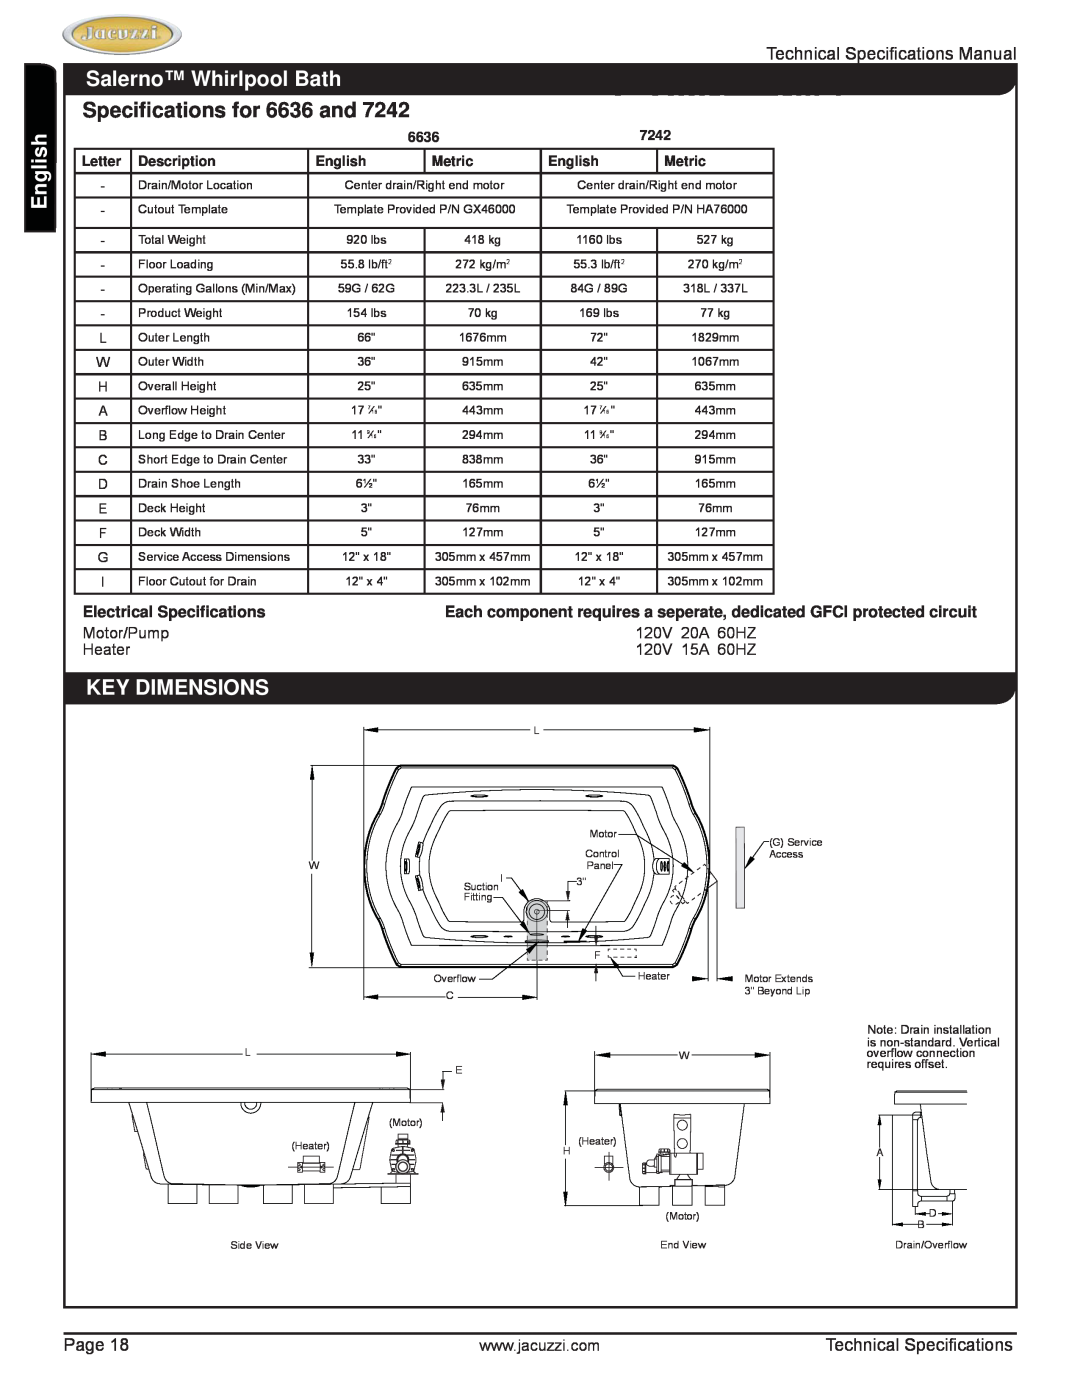 Jacuzzi HD85000 Salerno Whirlpool Bath, English, Speciﬁcations for 6636 and, Key Dimensions, Electrical Speciﬁcations 